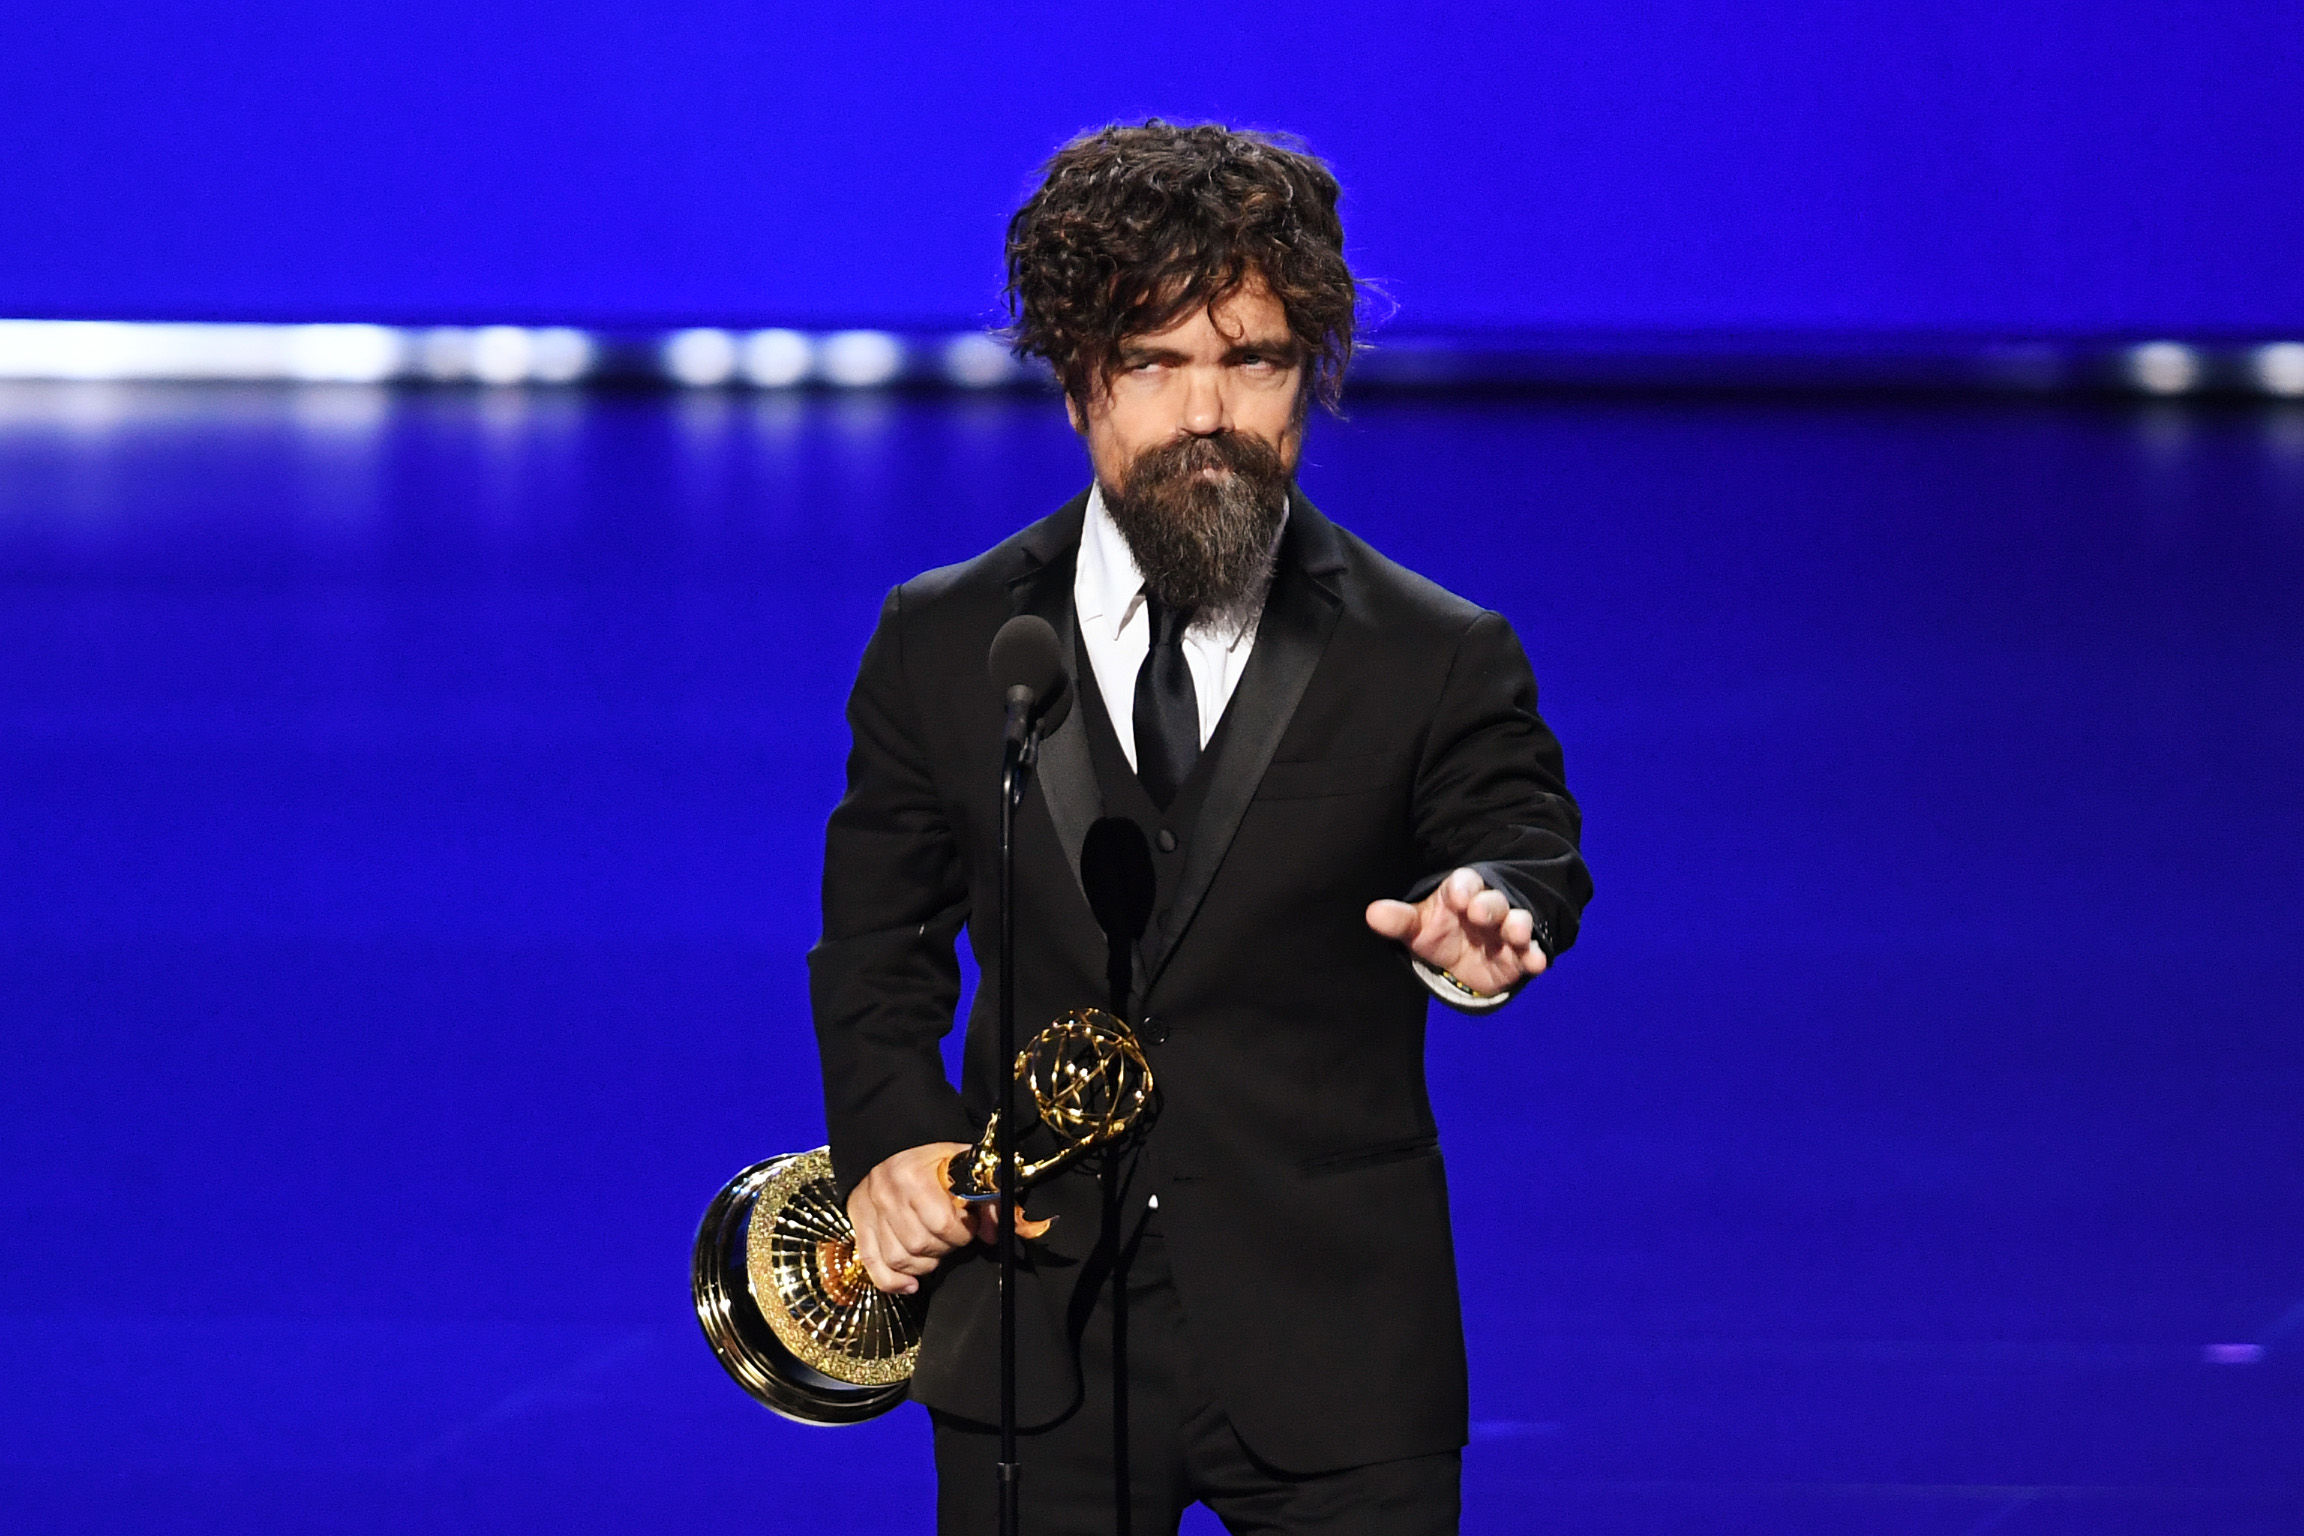 Peter Dinklage at the 71st Emmys